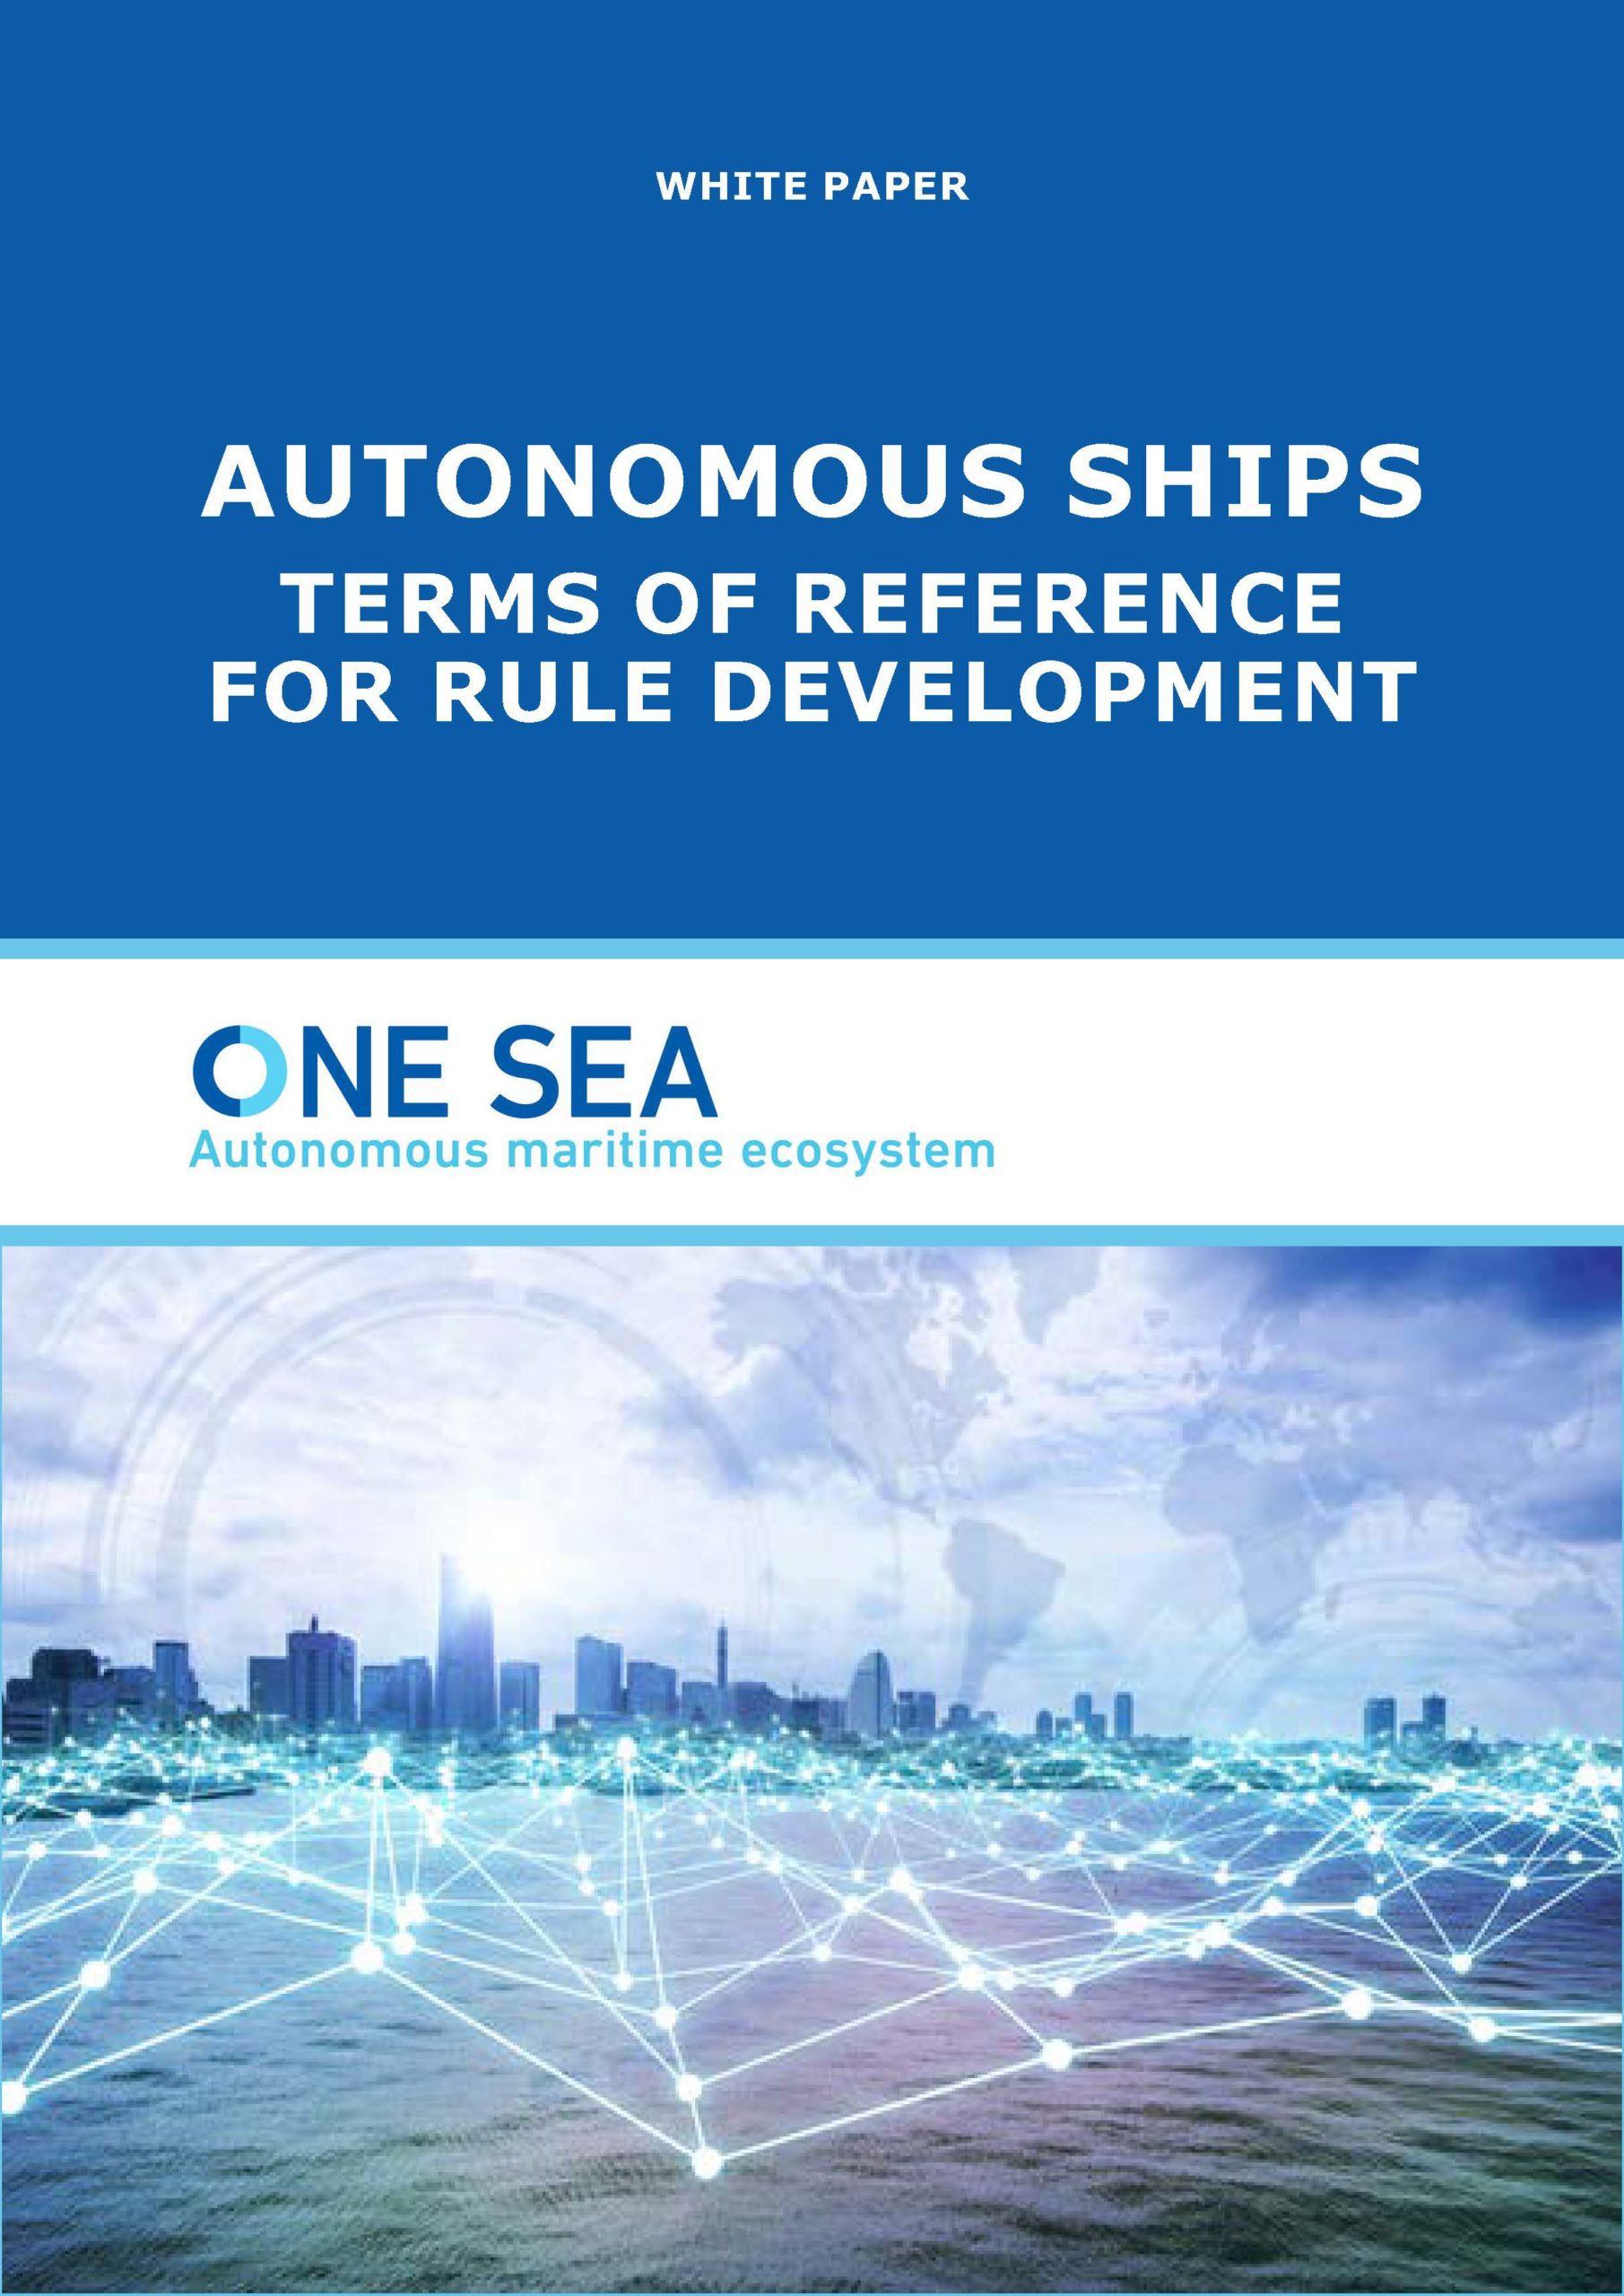 Defining the Levels of Automation: One Sea Whitepaper Offers Route Forward for Developing Rules for MASS